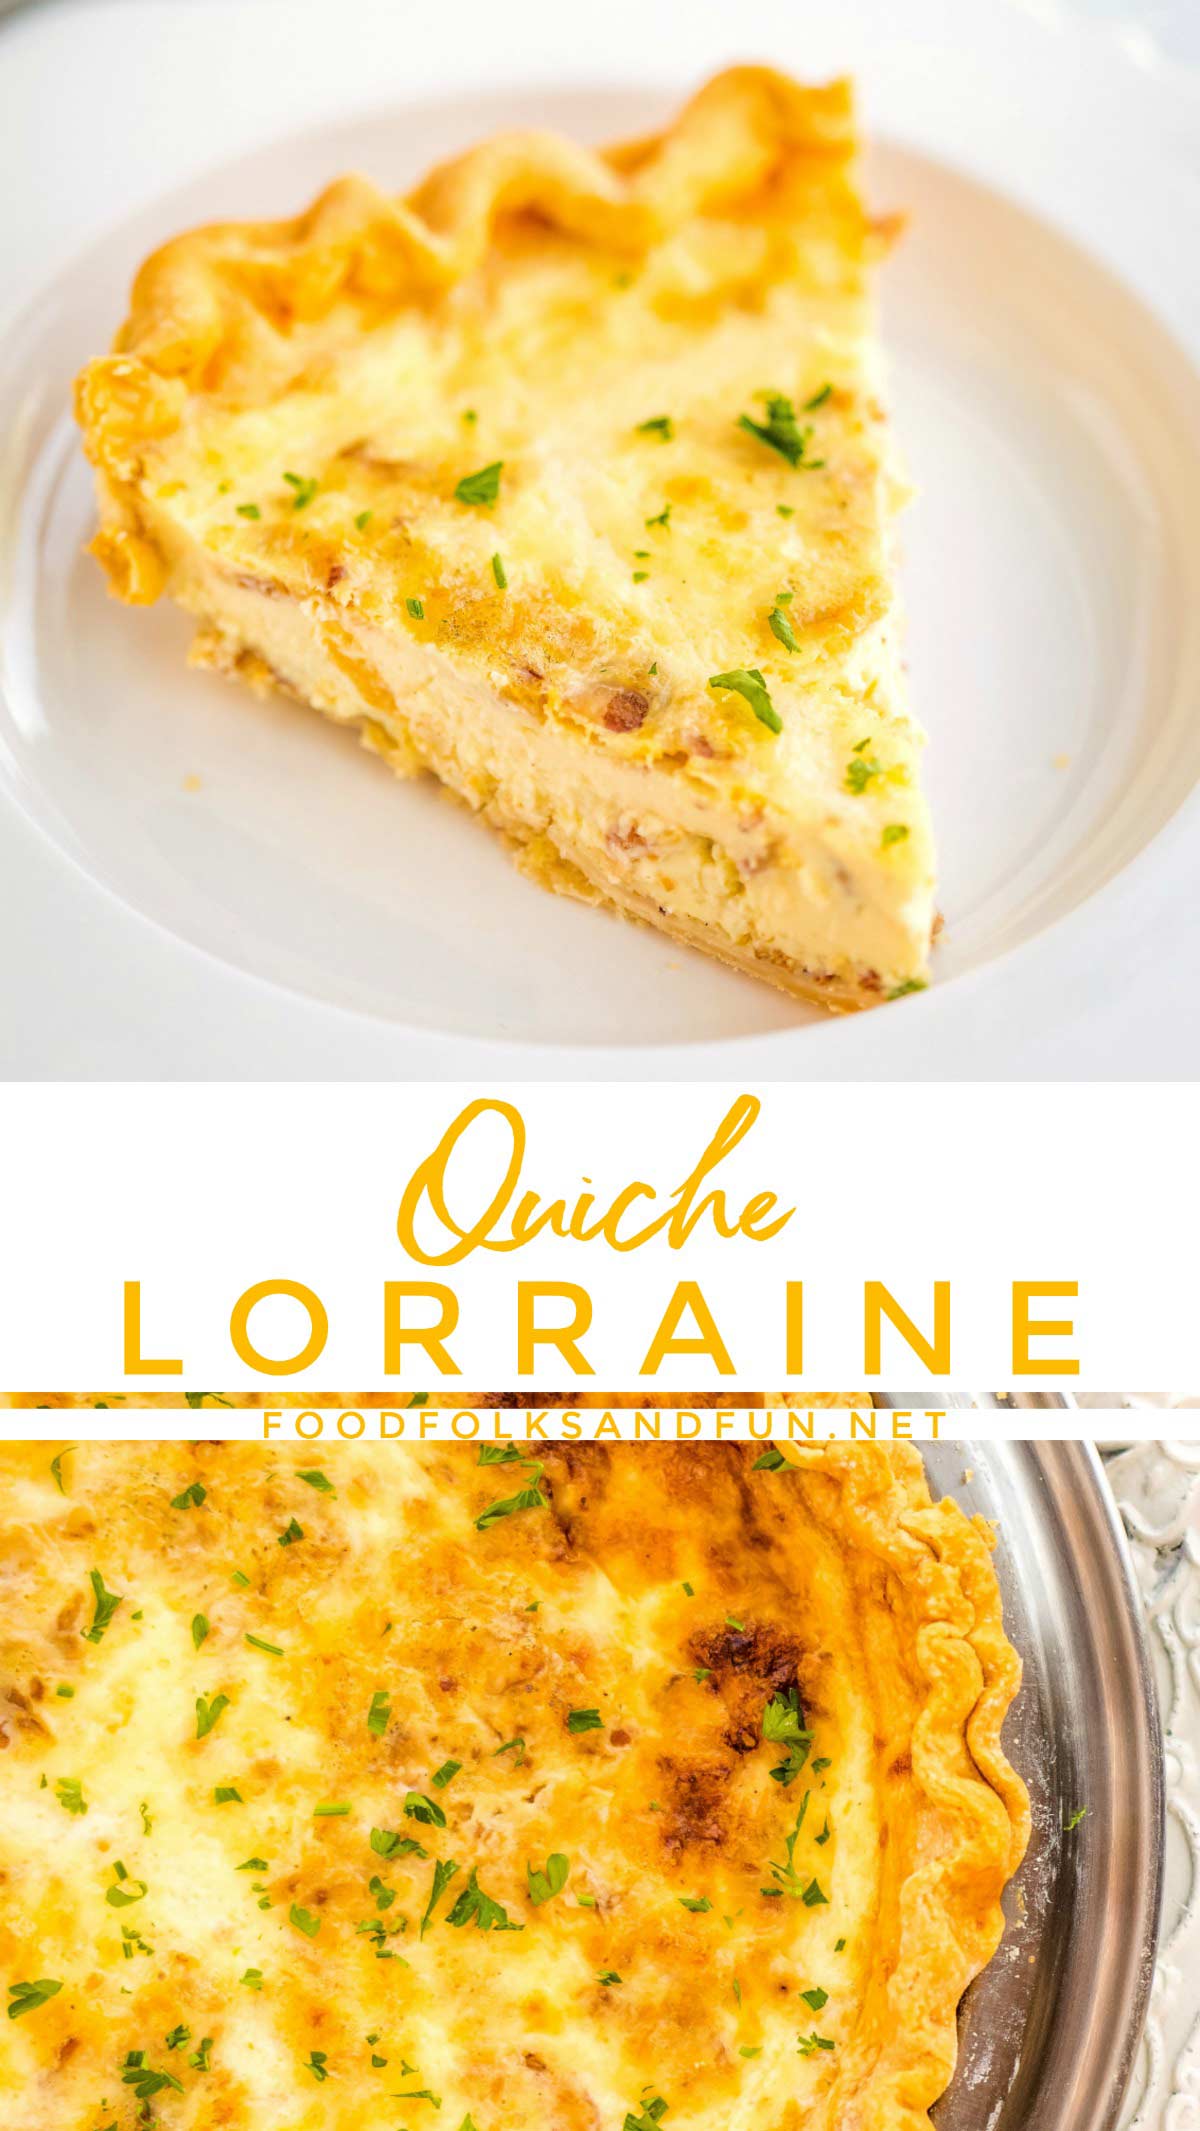 This Quiche Lorraine recipe boasts a crispy, buttery crust and a cheesy, custard-like interior that is full of flavor from the bacon, Gruyère cheese, and nutmeg. via @foodfolksandfun